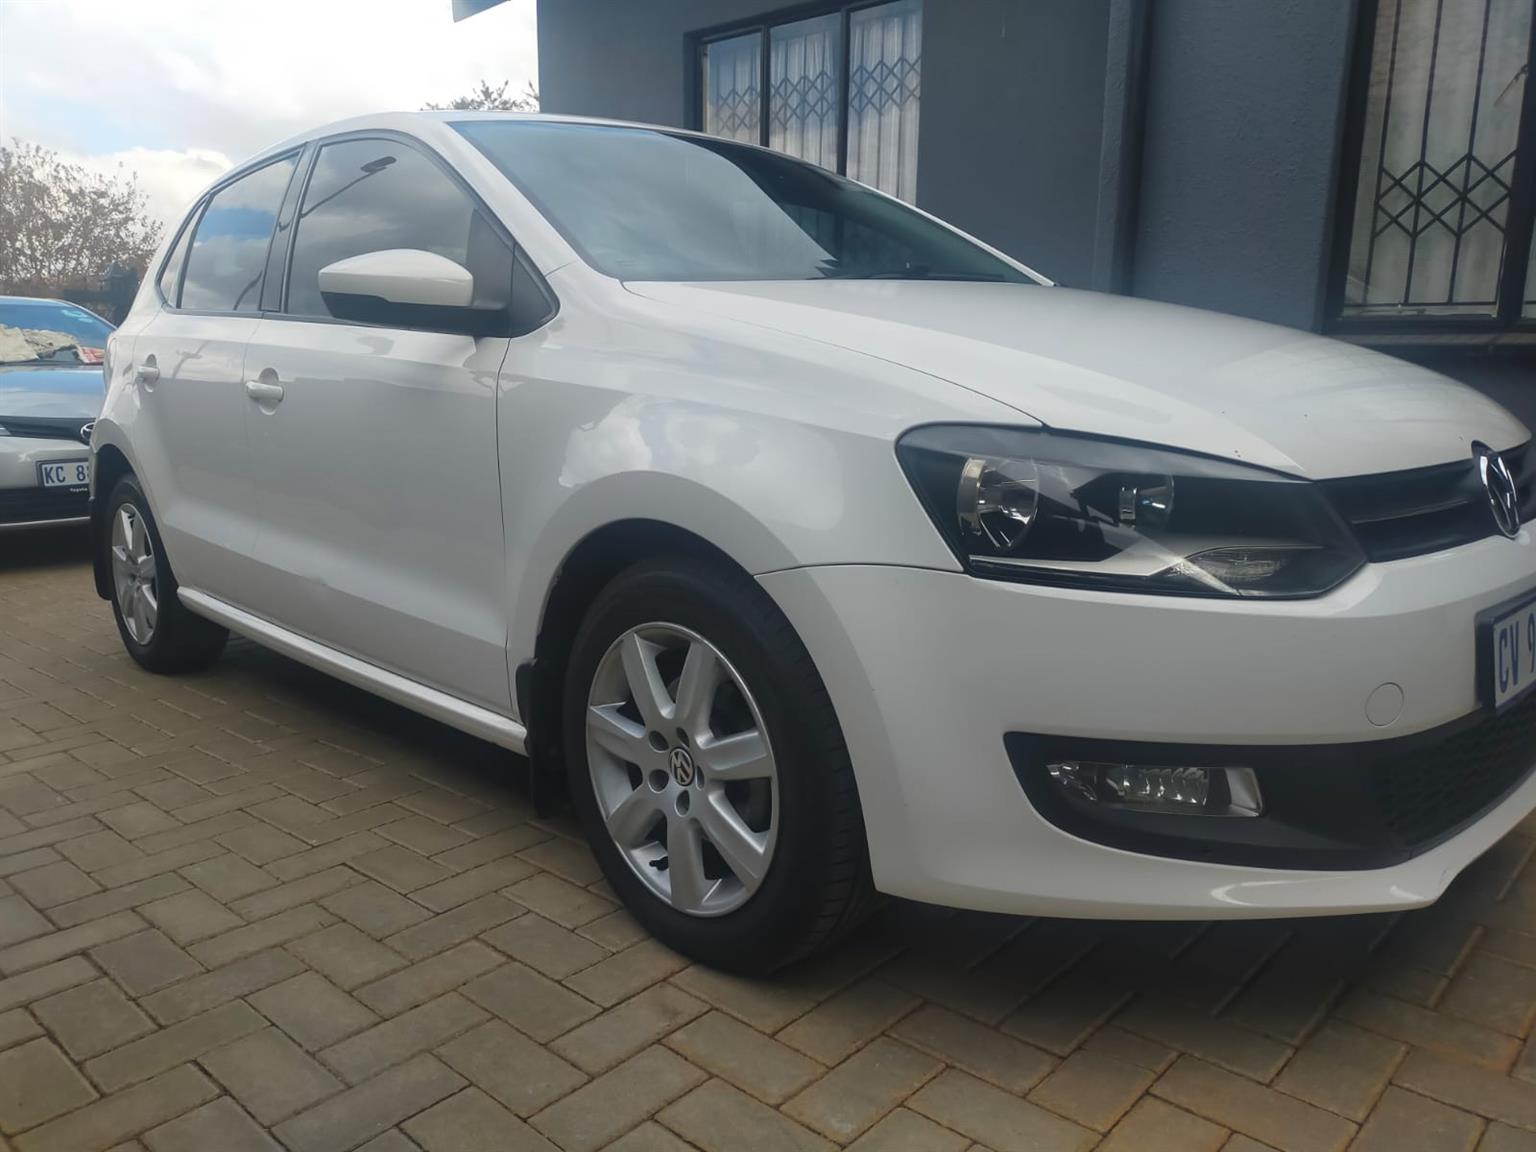 VW Polo 6R for sale